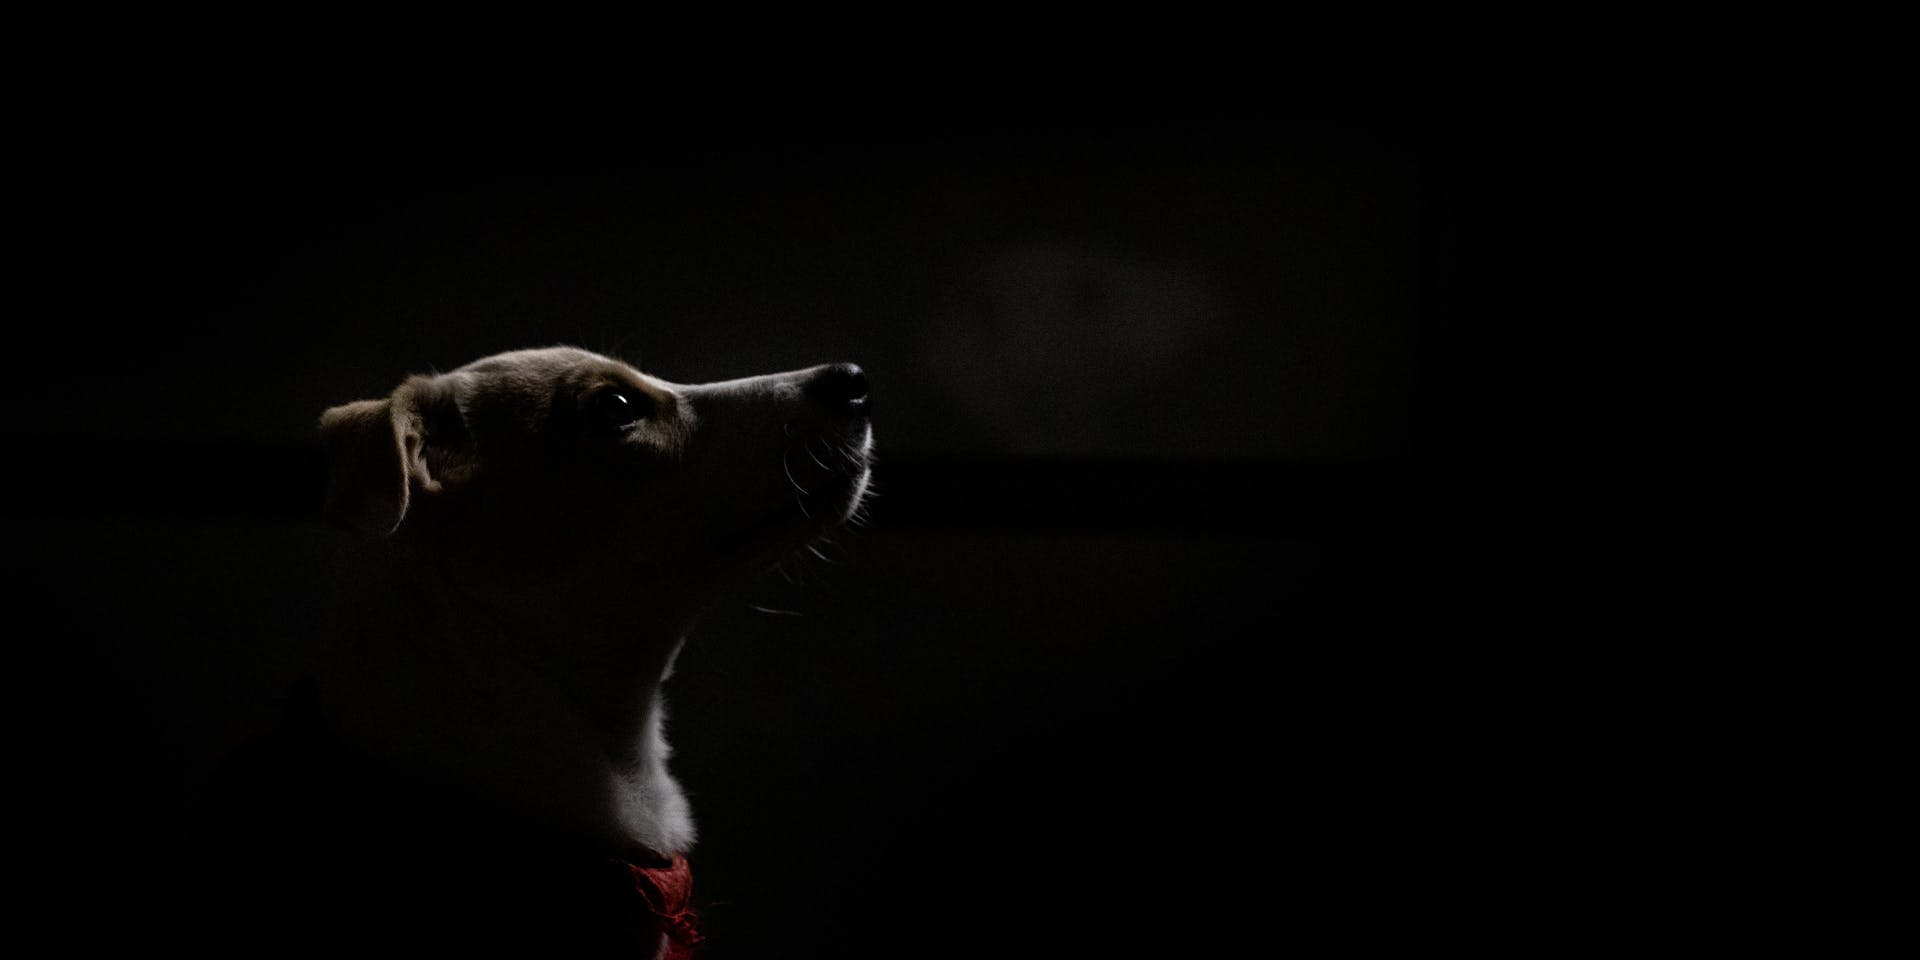 A side portrait of a puppy at night.